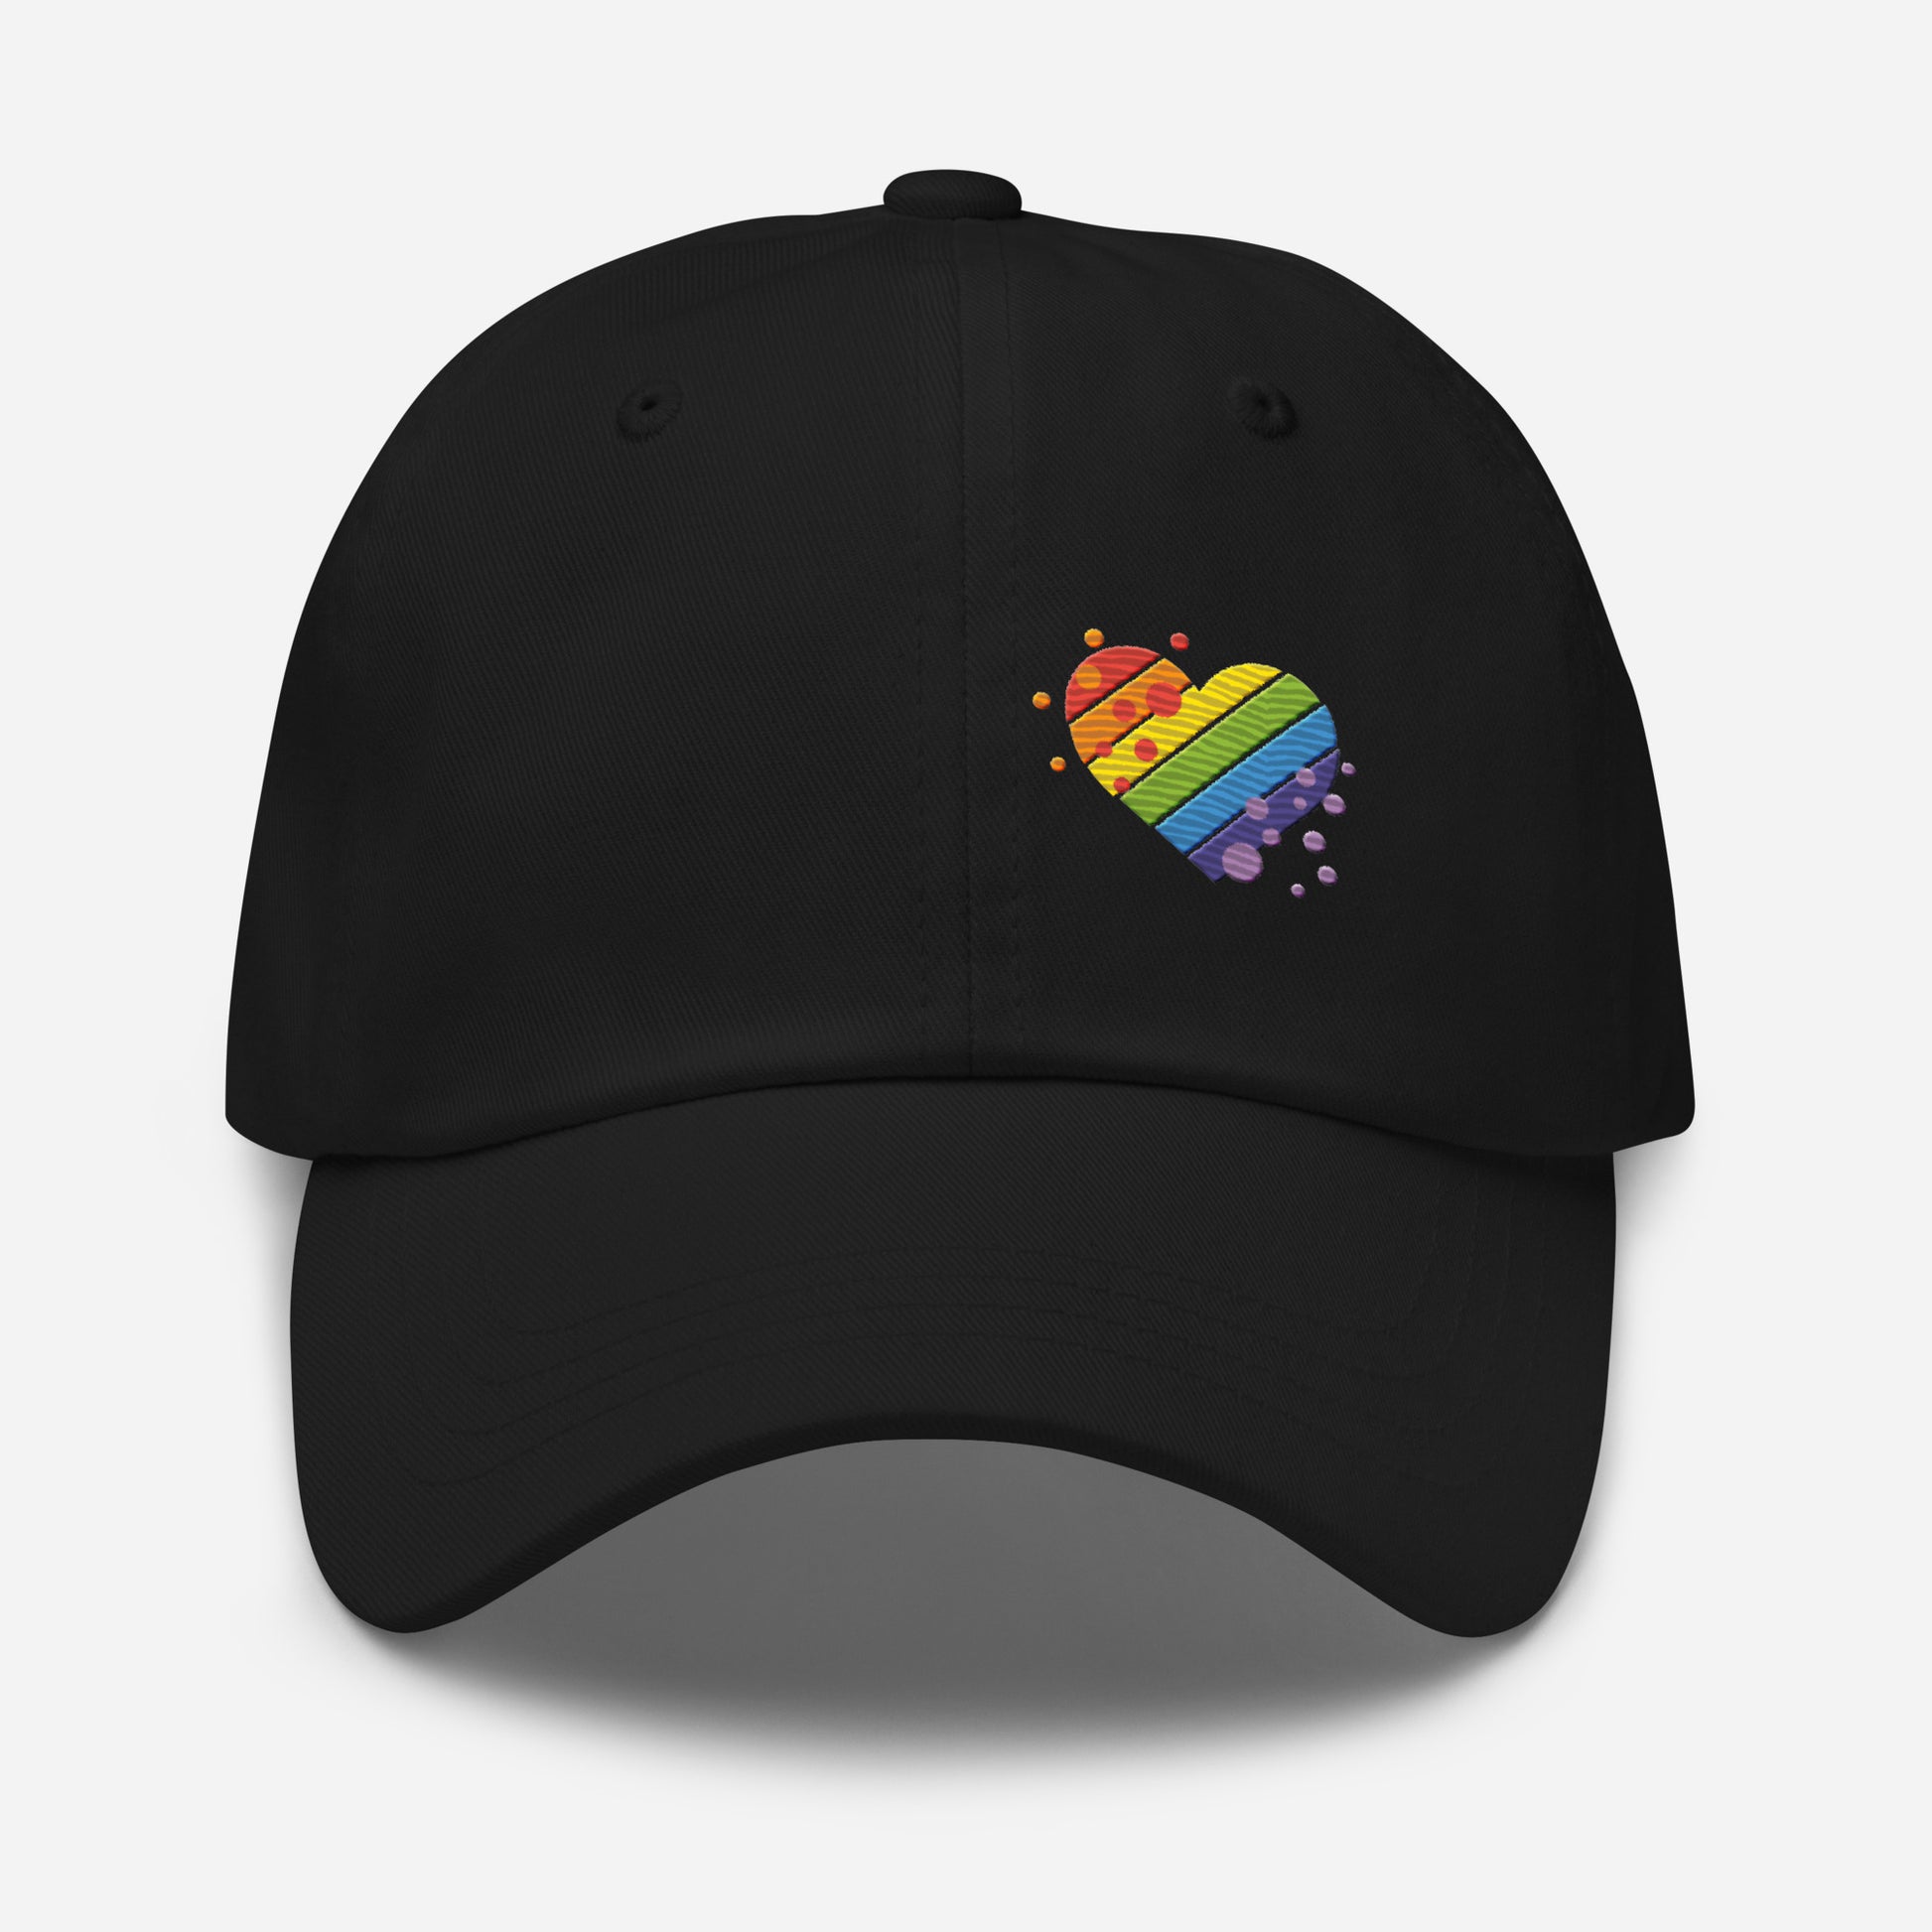 Black baseball hat featuring rainbow heart design embroidery with a low profile, adjustable strap.